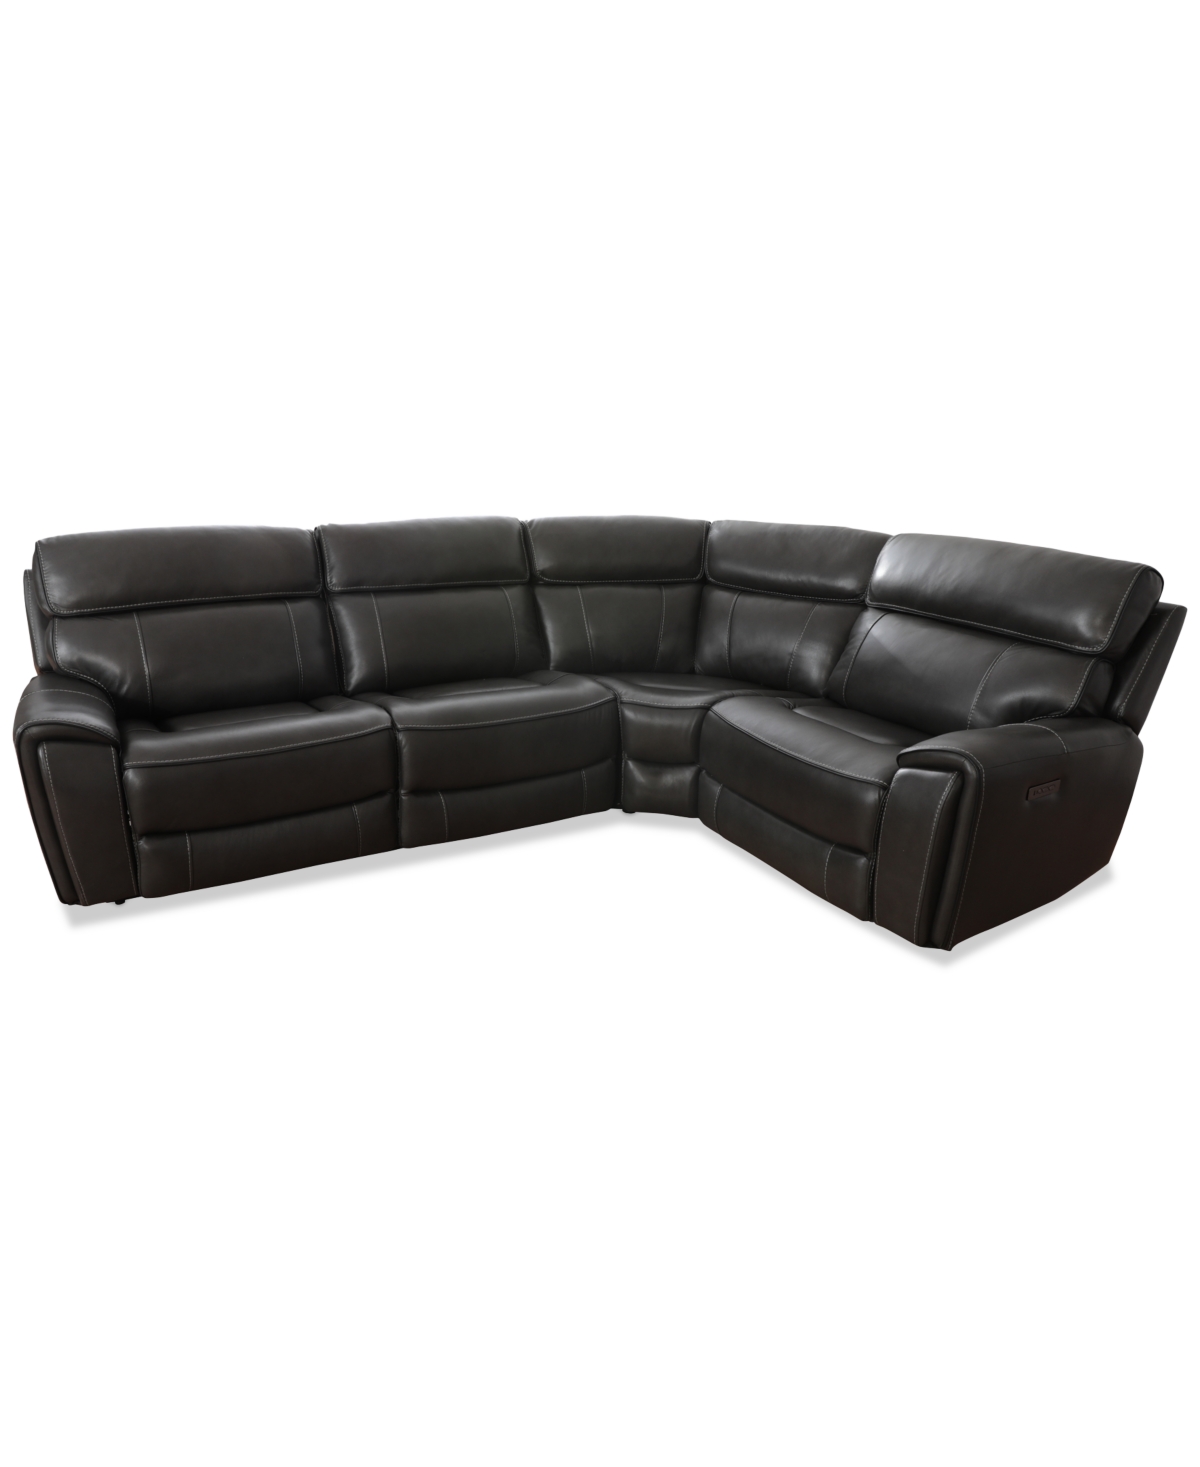 Macy's Hutchenson 119.5" 4-pc. Zero Gravity Leather Sectional With 2 Power Recliners, Created For  In Coffee